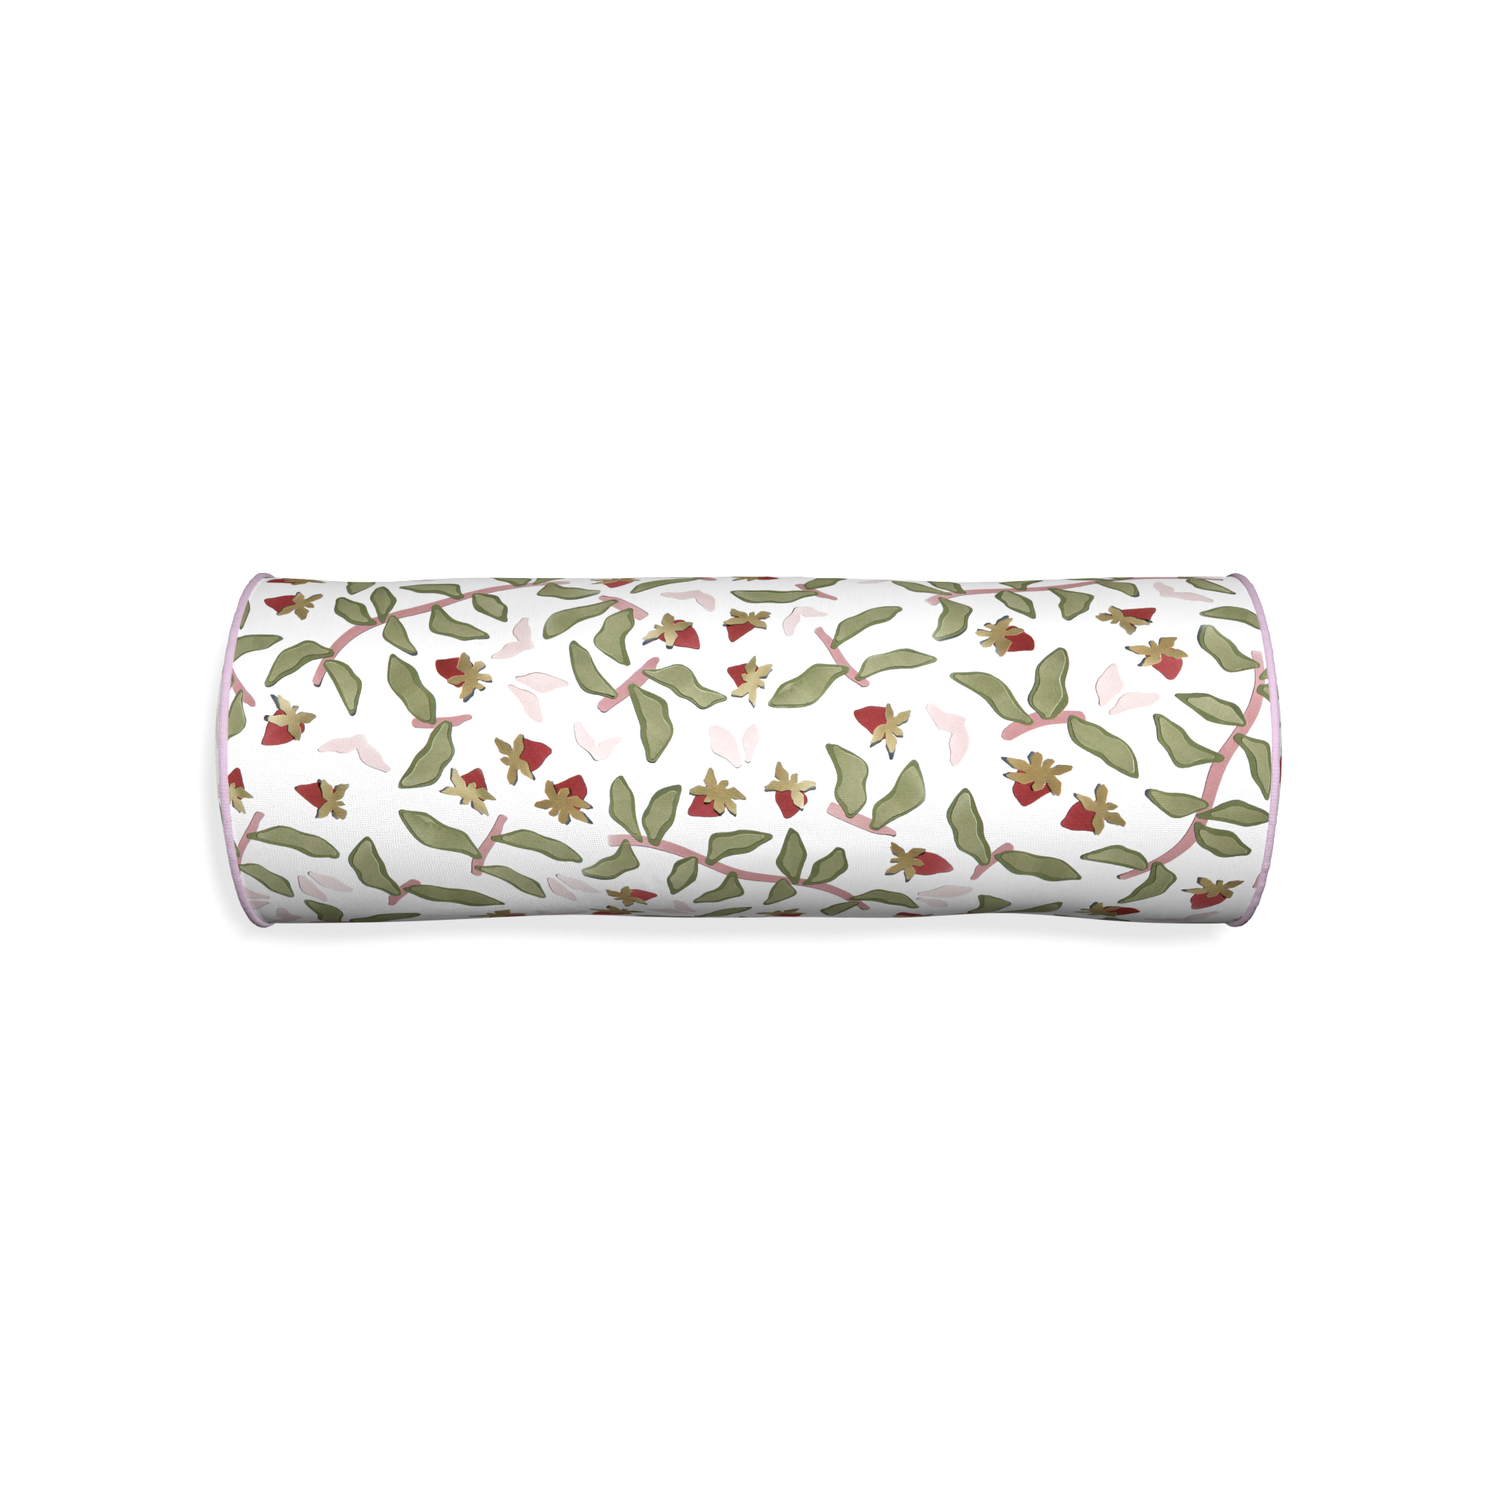 Bolster nellie custom strawberry & botanicalpillow with l piping on white background